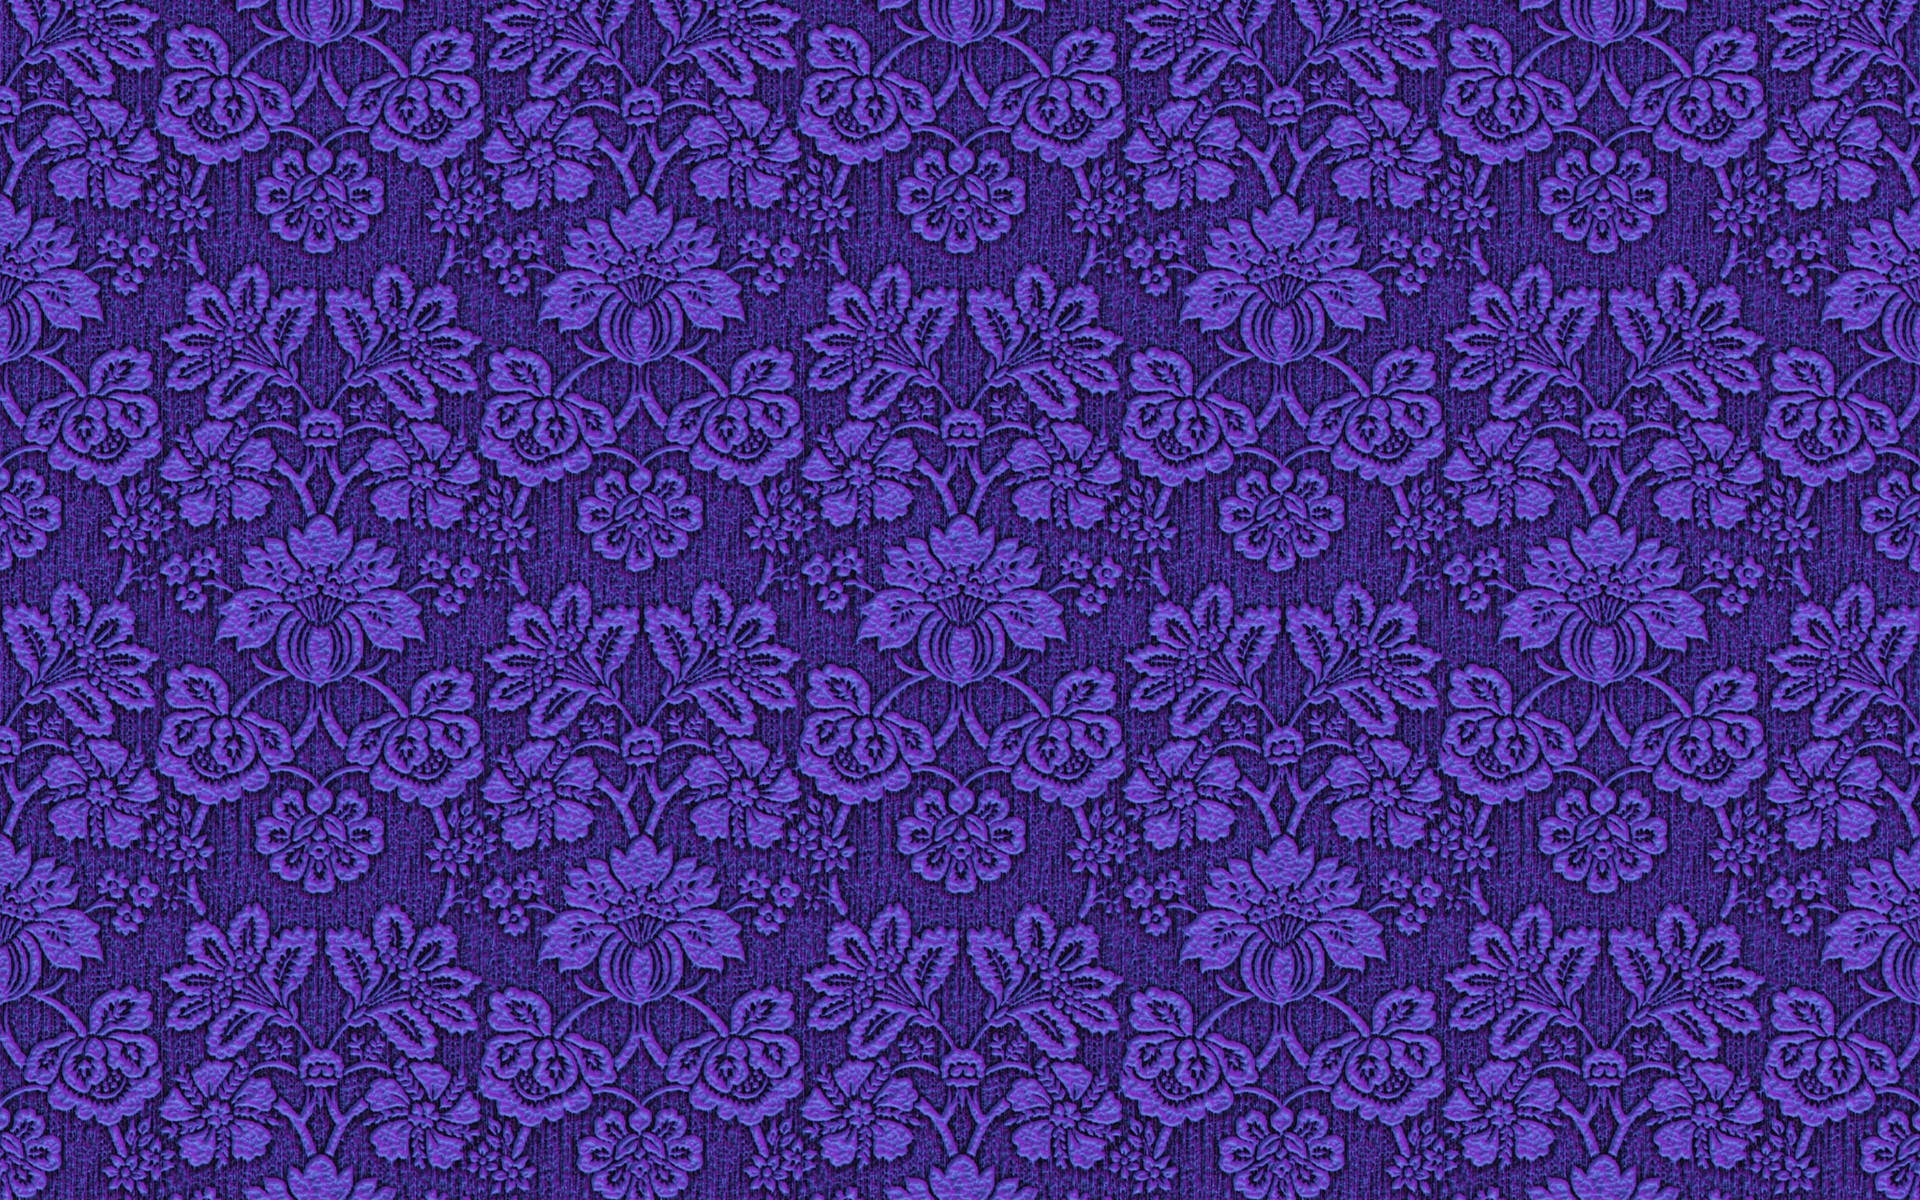 Violet Aesthetic Floral Fabric